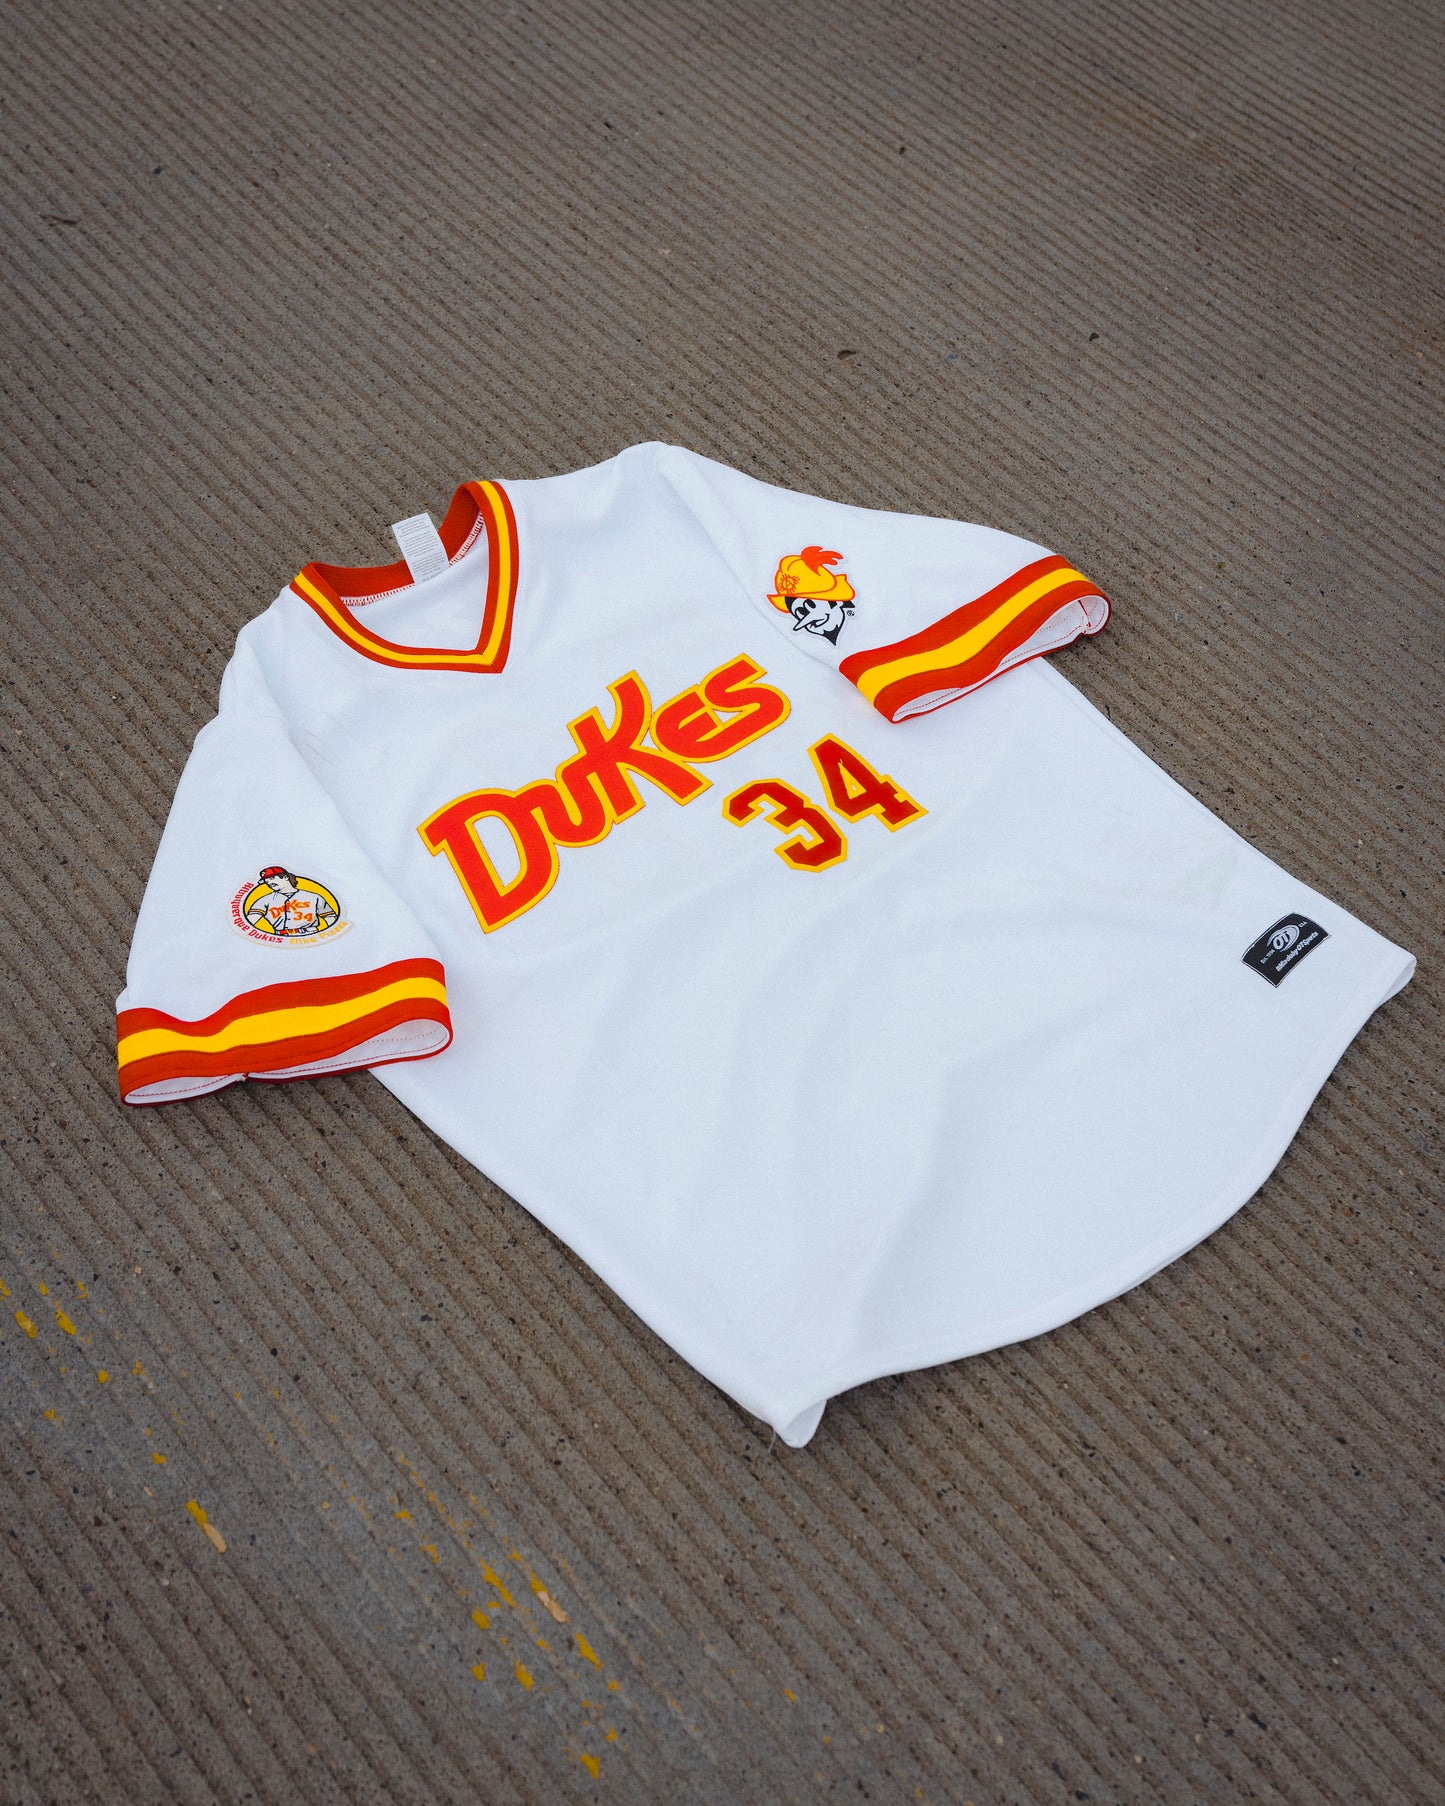 Albuquerque Dukes Limited Mike Piazza White V-Neck Jersey Large